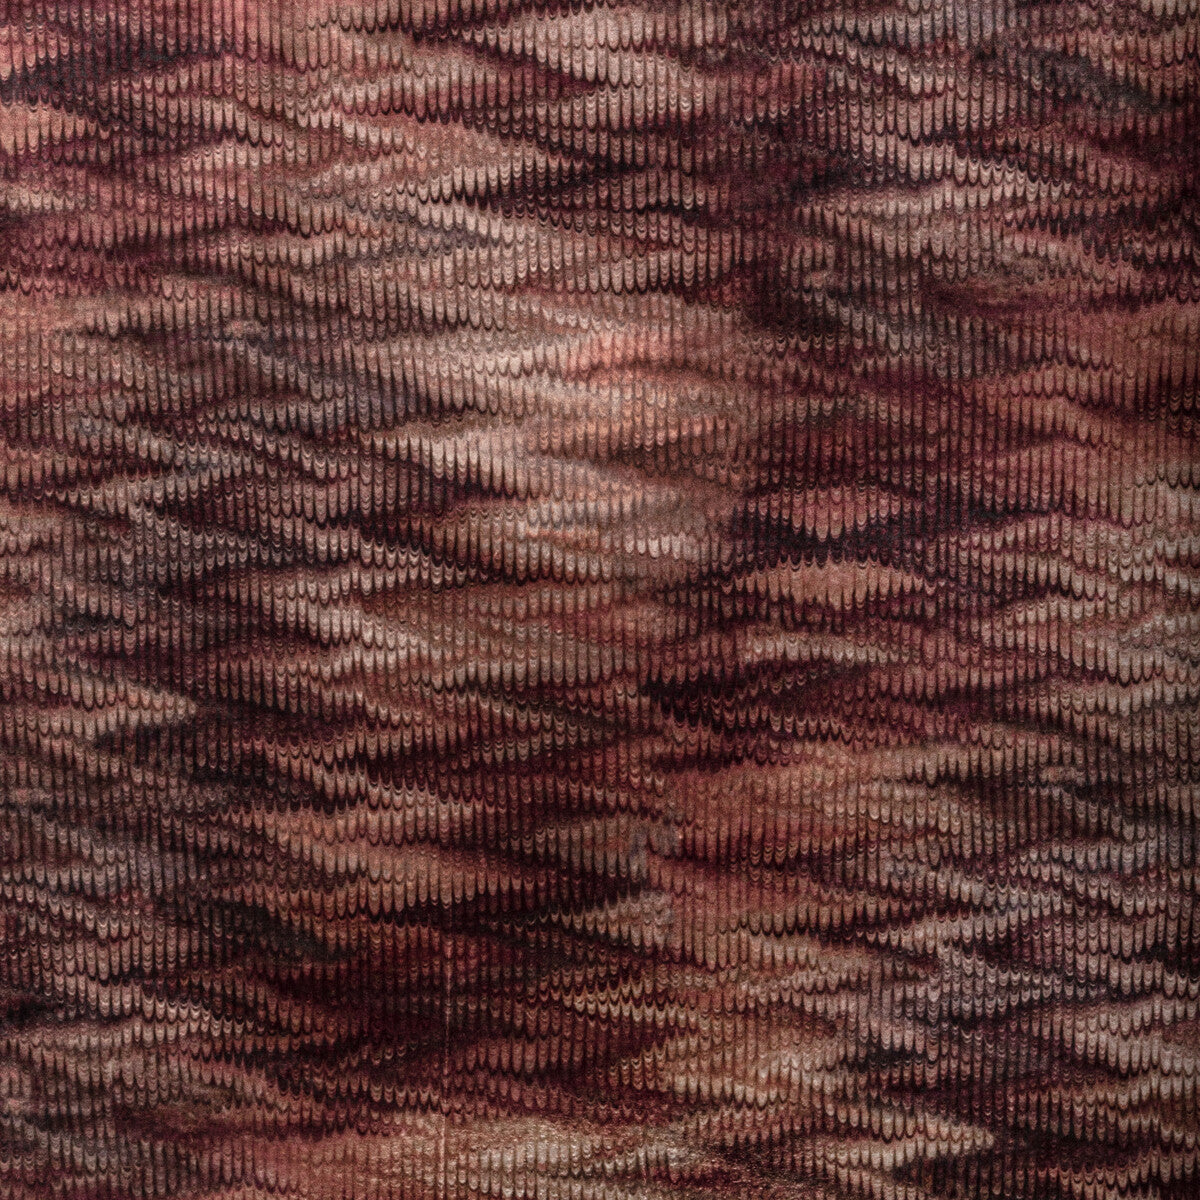 Boscage fabric in merlot color - pattern BOSCAGE.9.0 - by Kravet Couture in the Corey Damen Jenkins Trad Nouveau collection